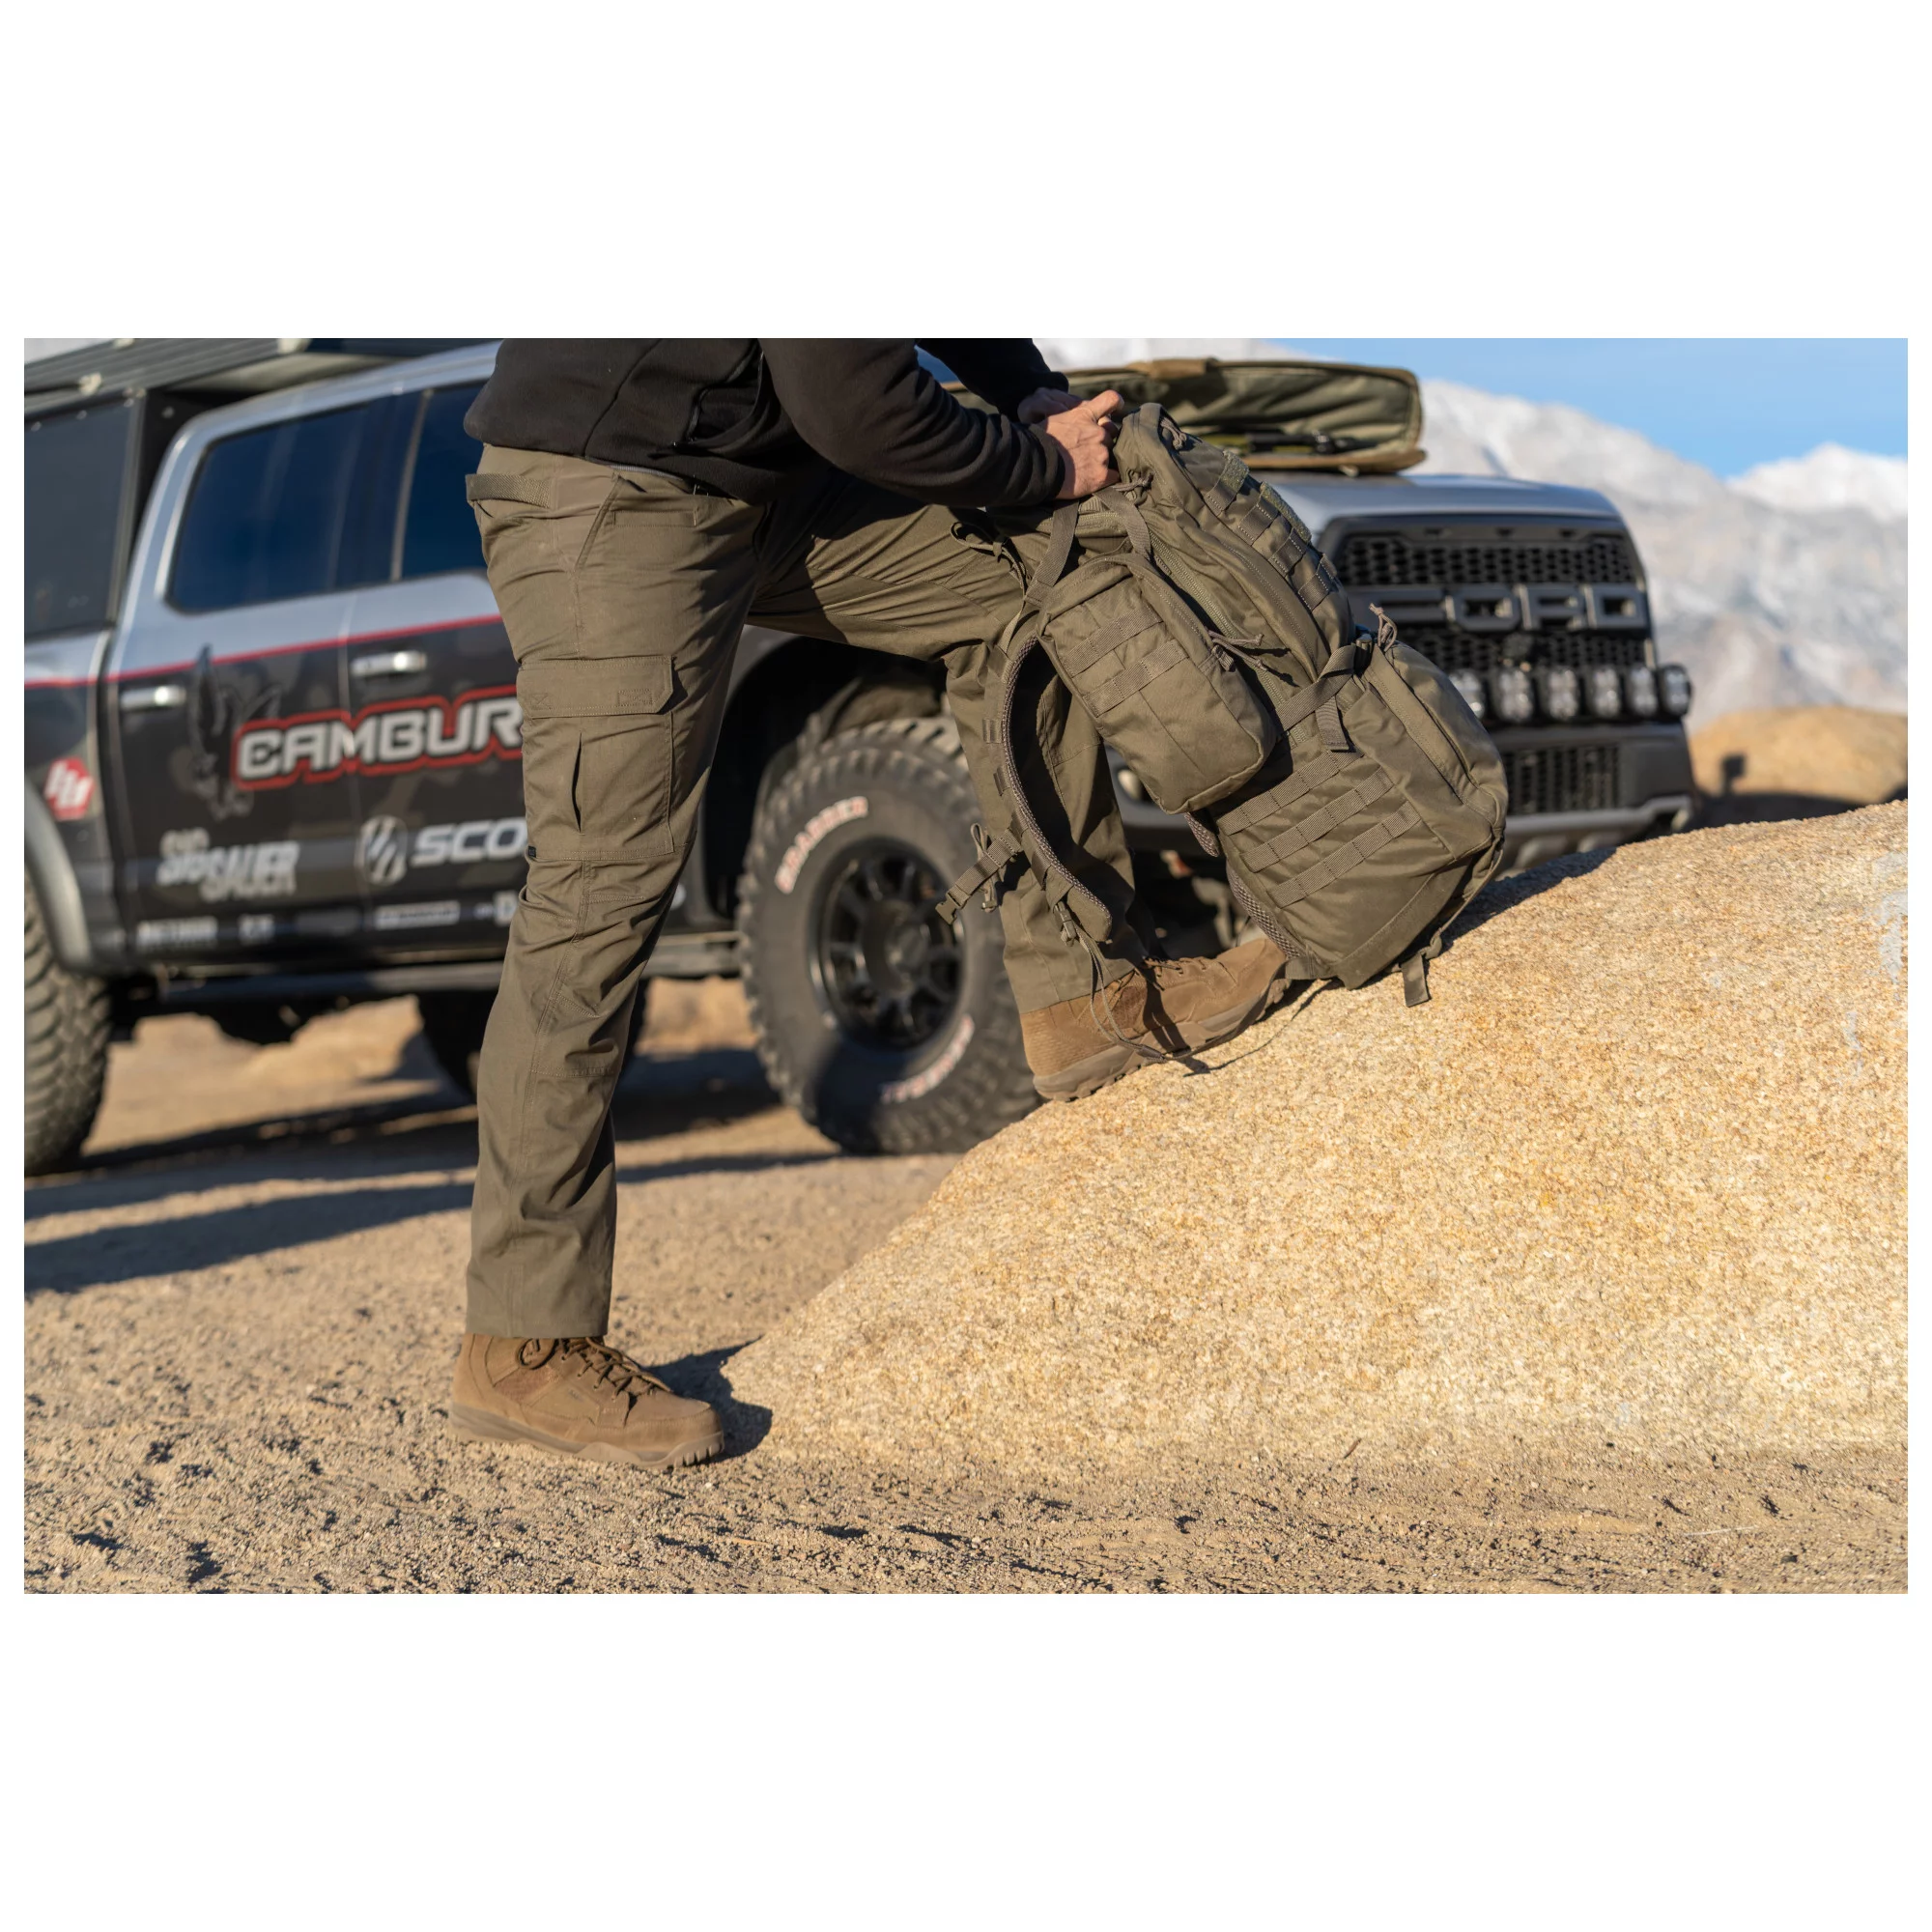 Buy 5.11 Tactical A/T 6' Boot, Dark Coyote - 12440-106. Price - 183.41 USD.  Worldwide shipping.